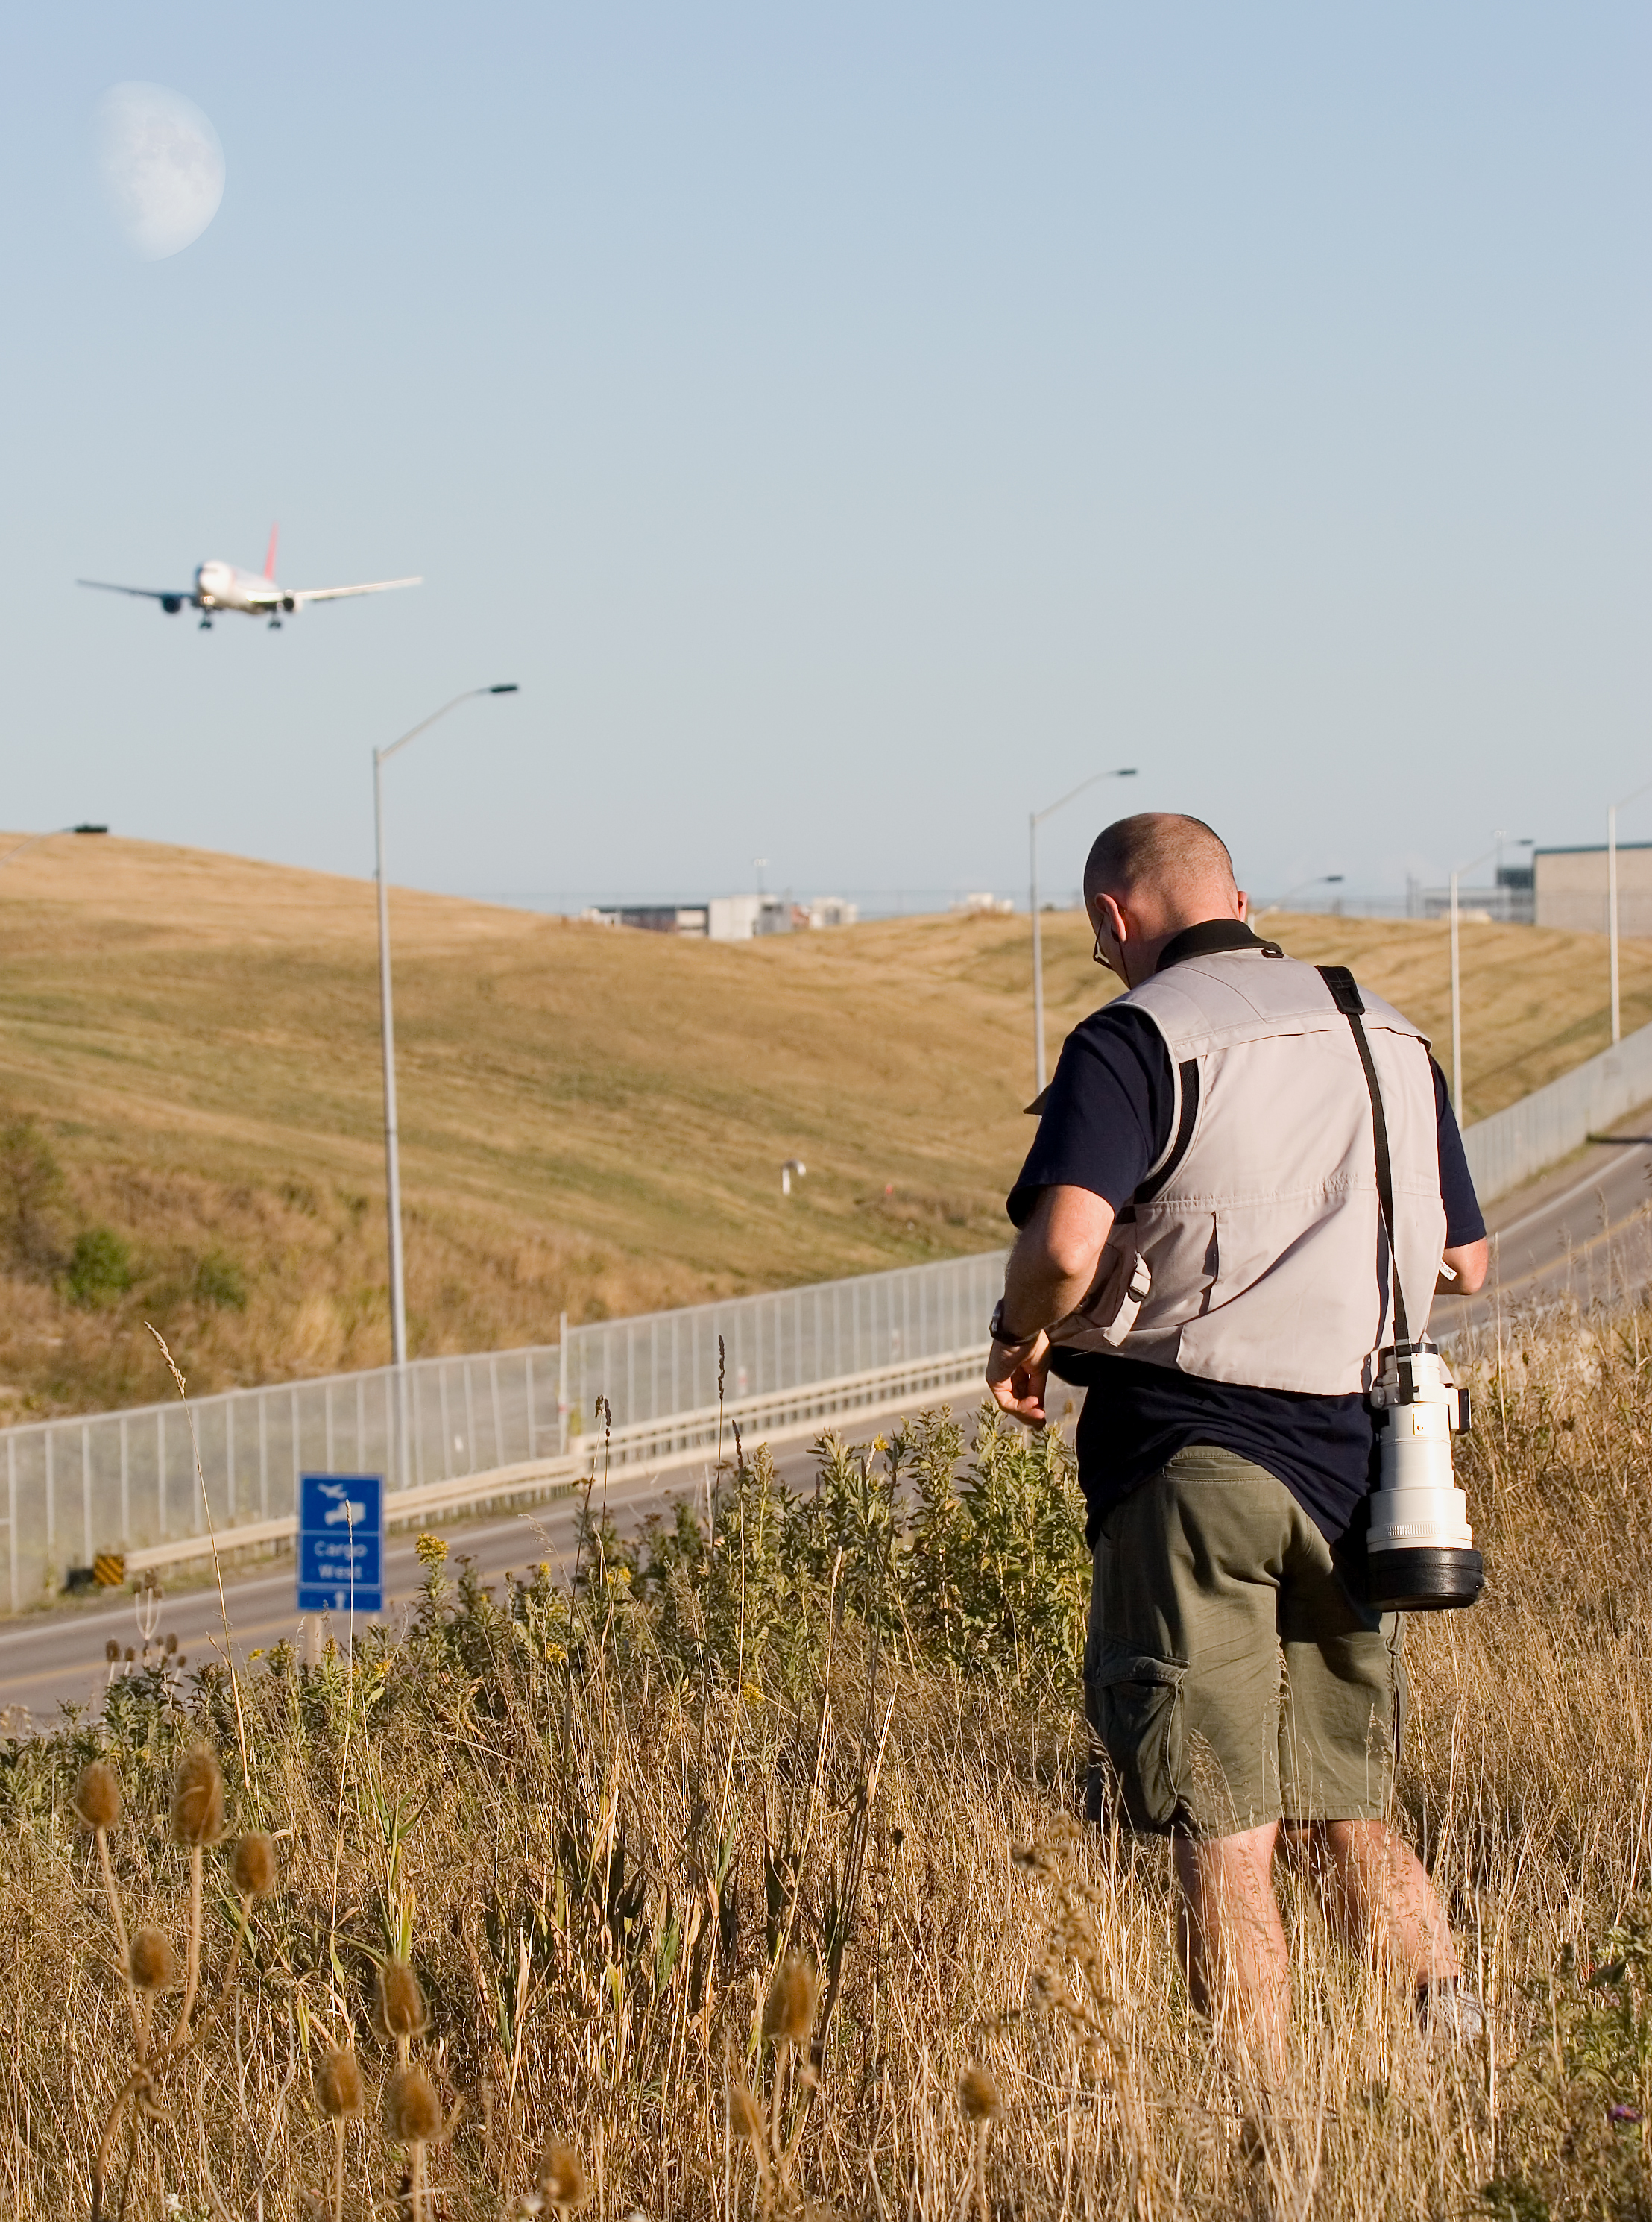 Man with camera outside planespotting